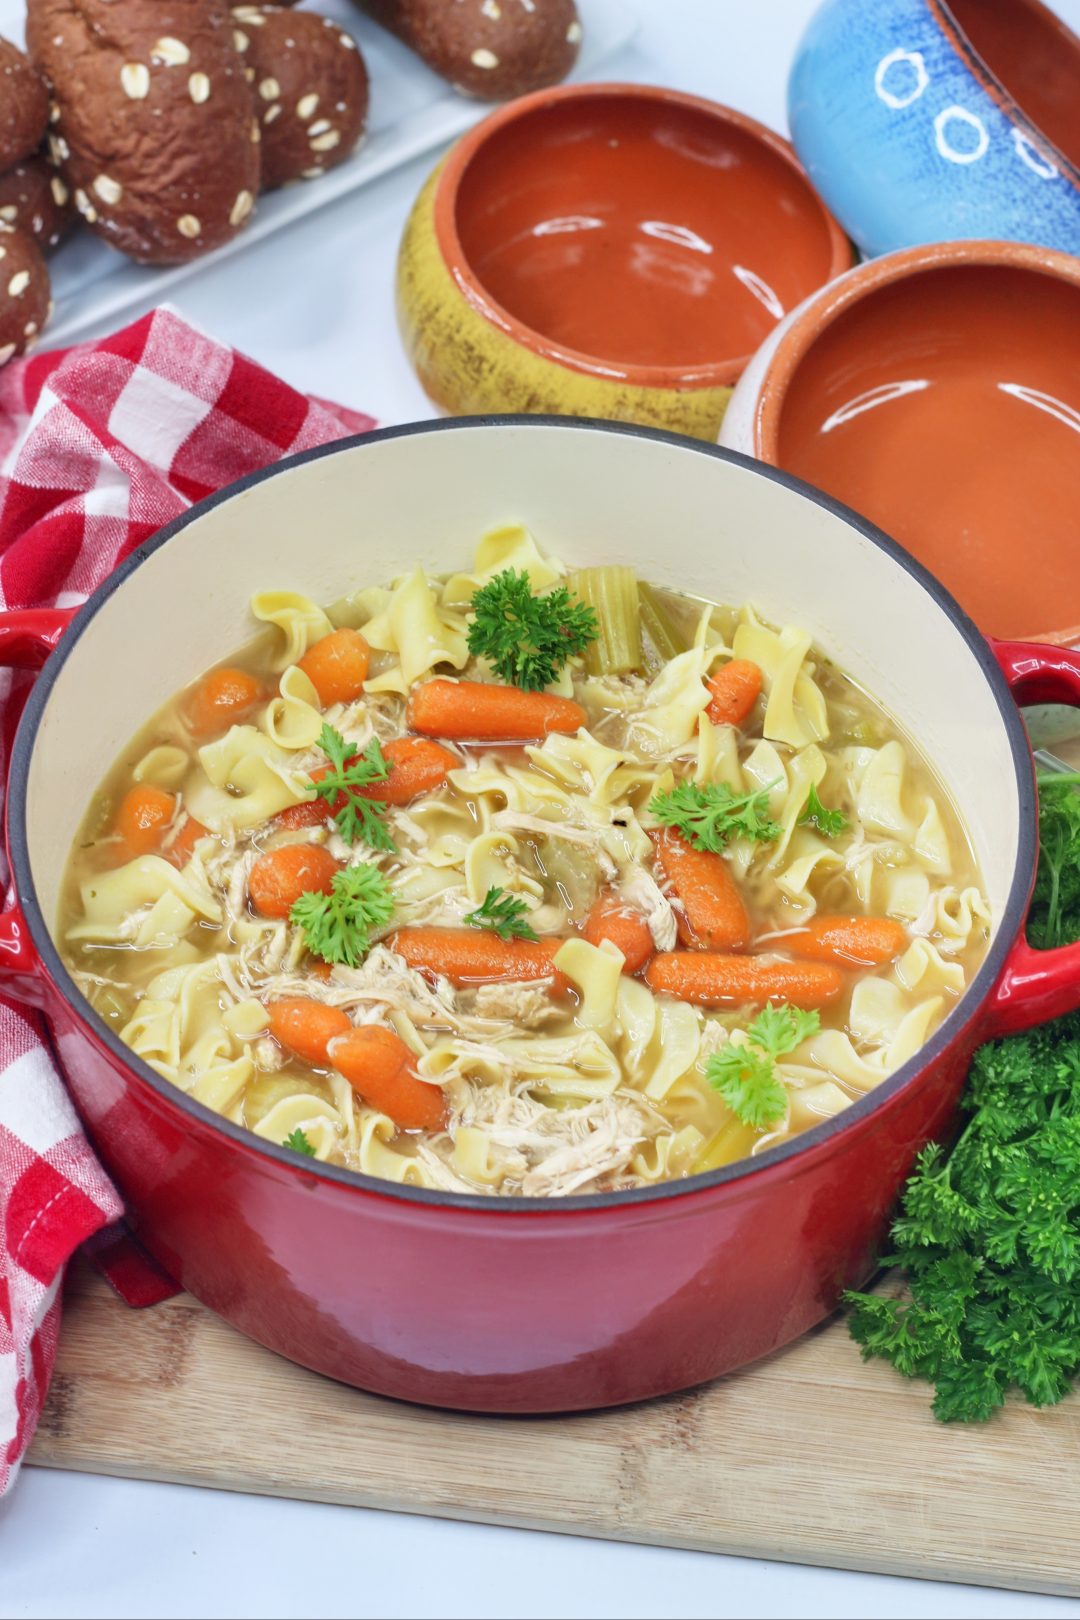 Homestyle Chicken Noodle Soup 4 1 1080x1620 